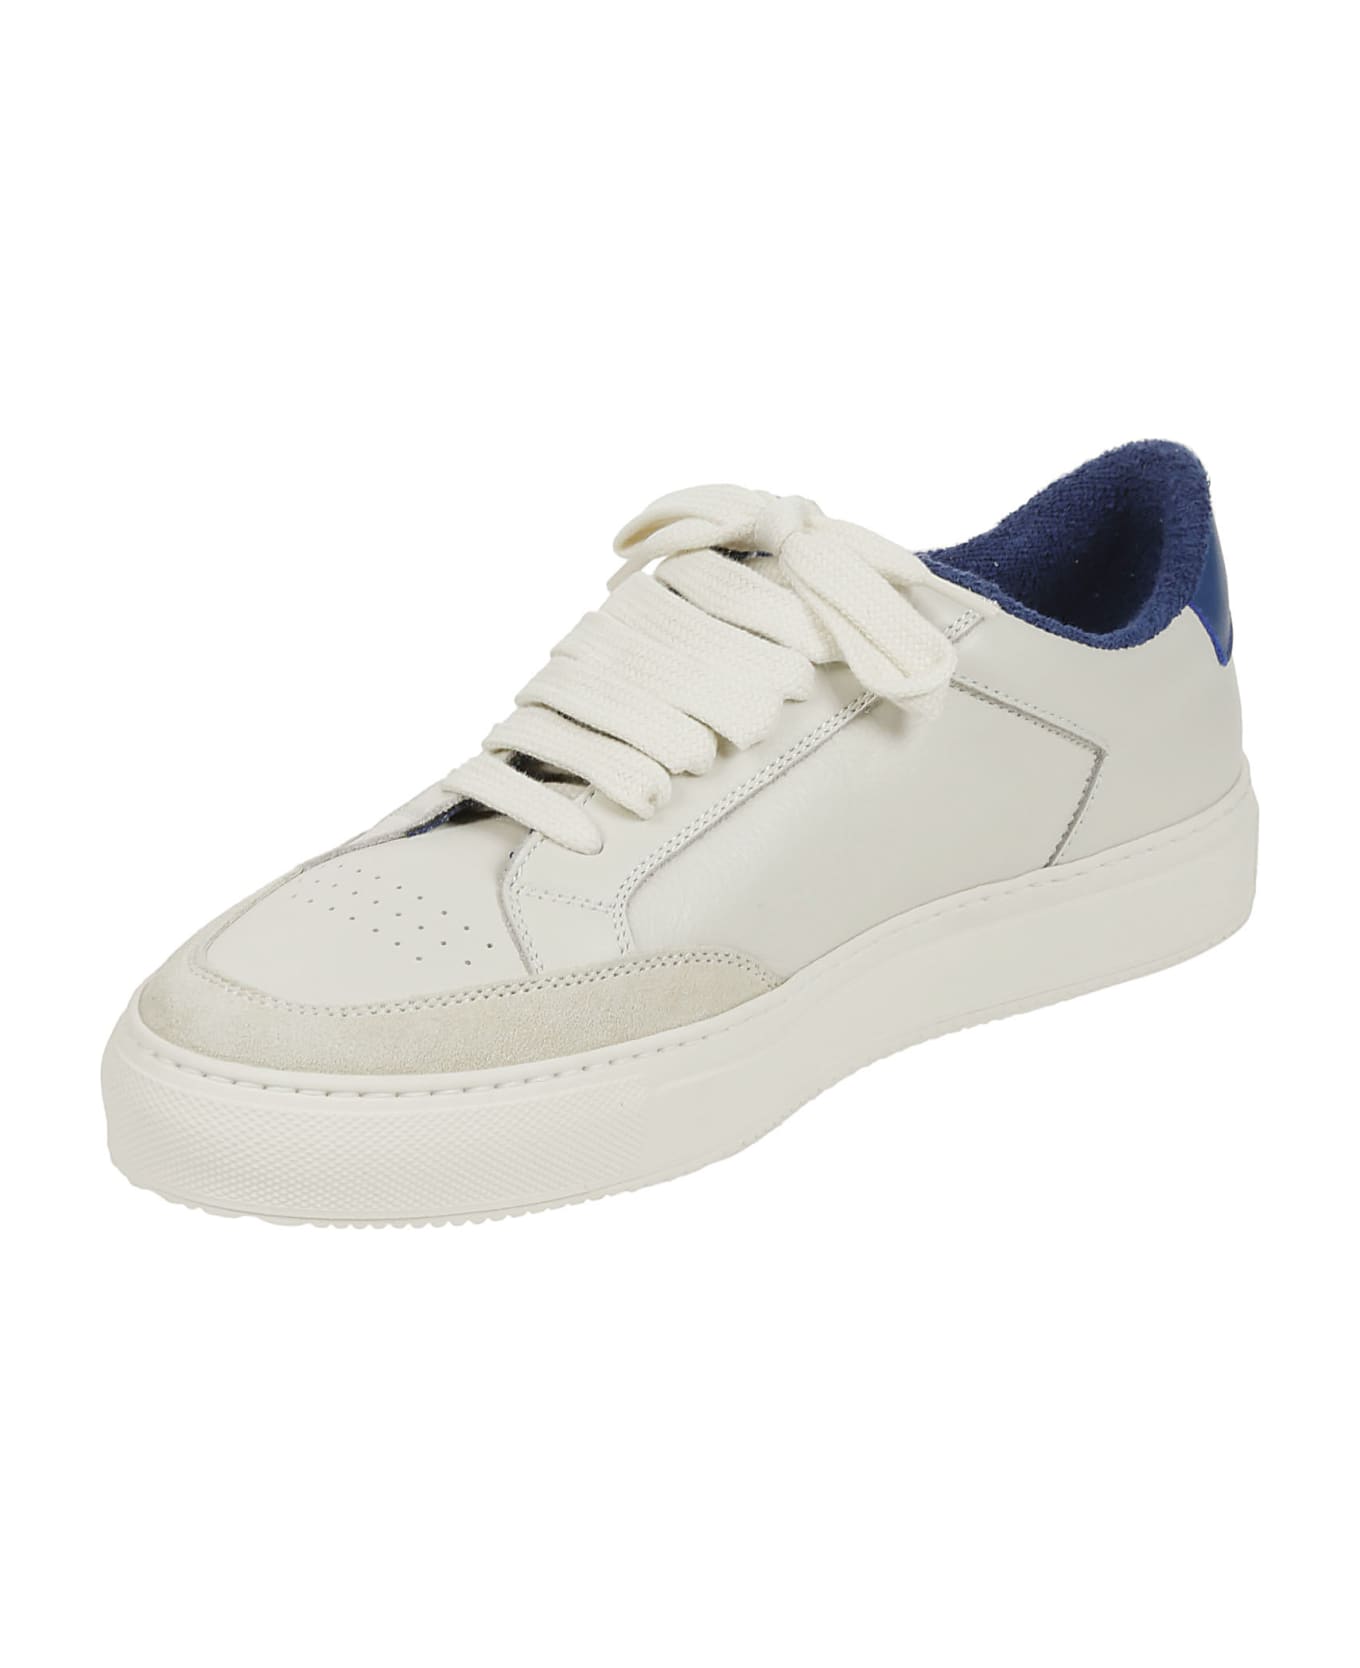 Common Projects Tennis Pro - Blue スニーカー